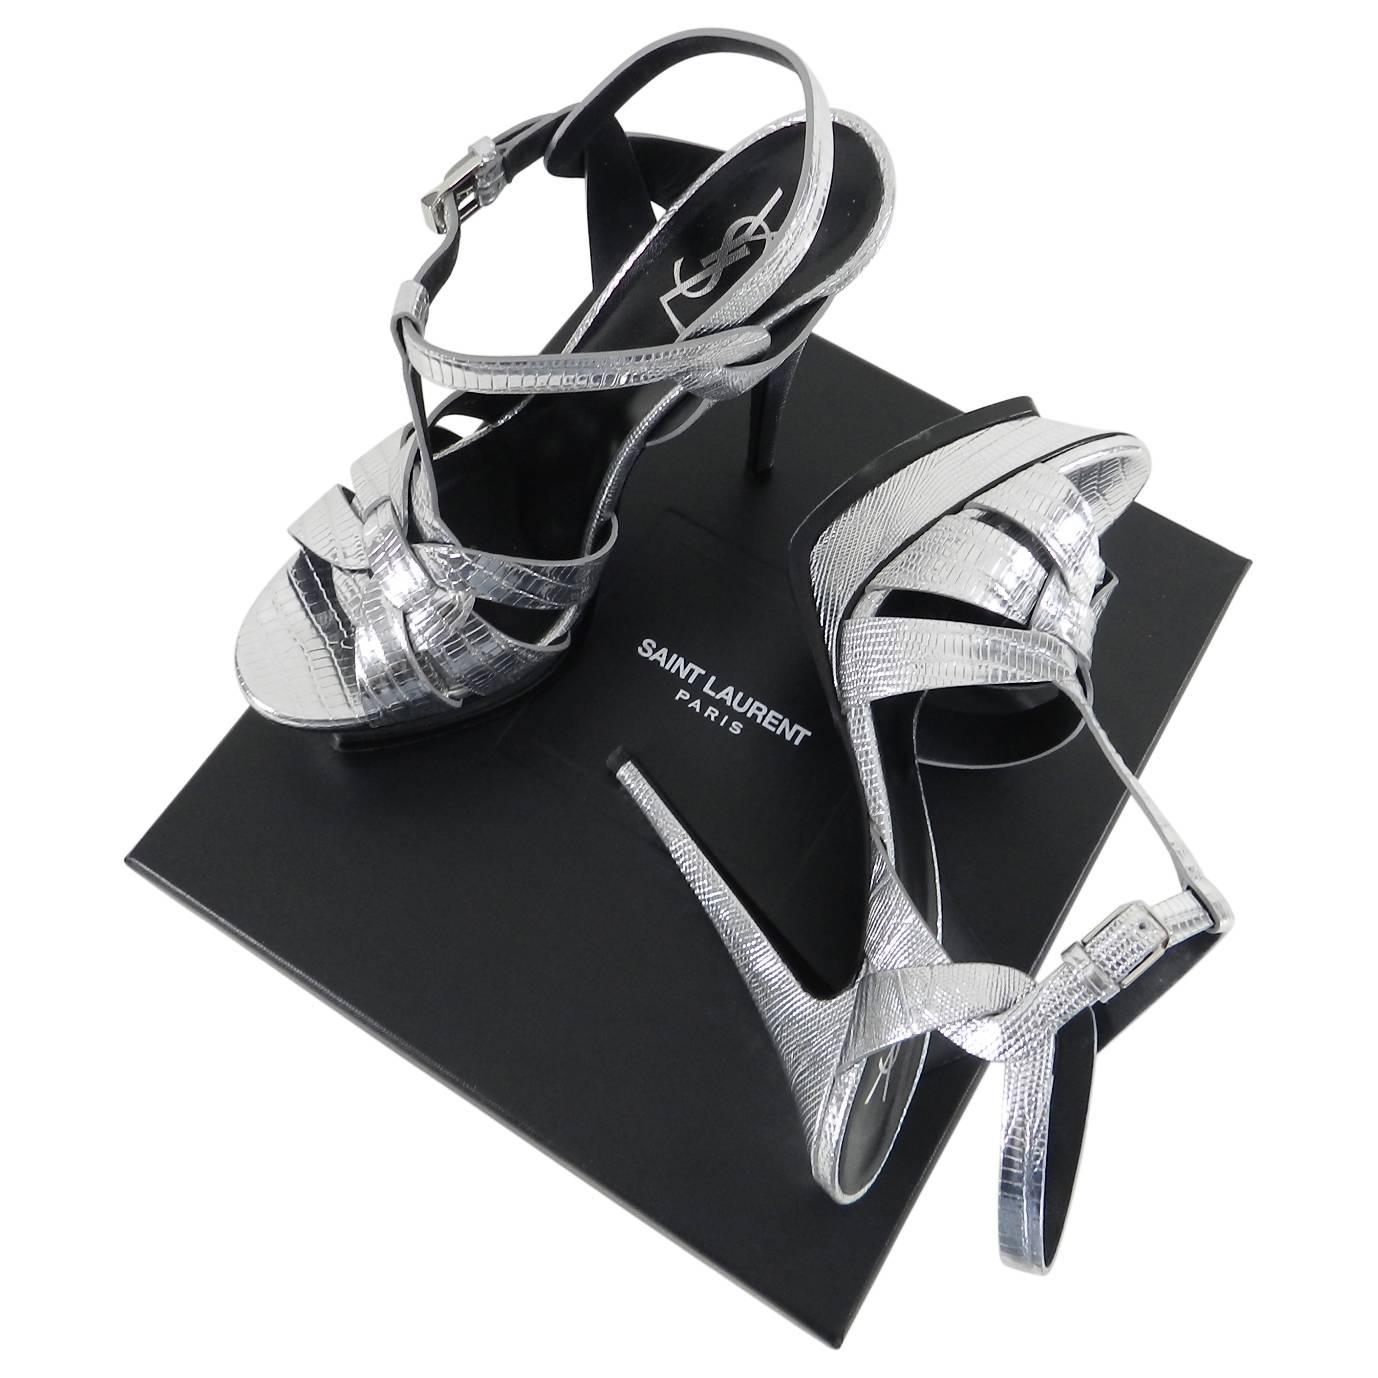 Saint Laurent Silver Metallic Tribute Faux Lizard Embossed Sandals.  Pointed stiletto heel, platform base, adjustable ankle strap with silver toned buckle. Marked size 40 (USA 9.5). 135mm high heel.  Excellent pre-owned condition with some light